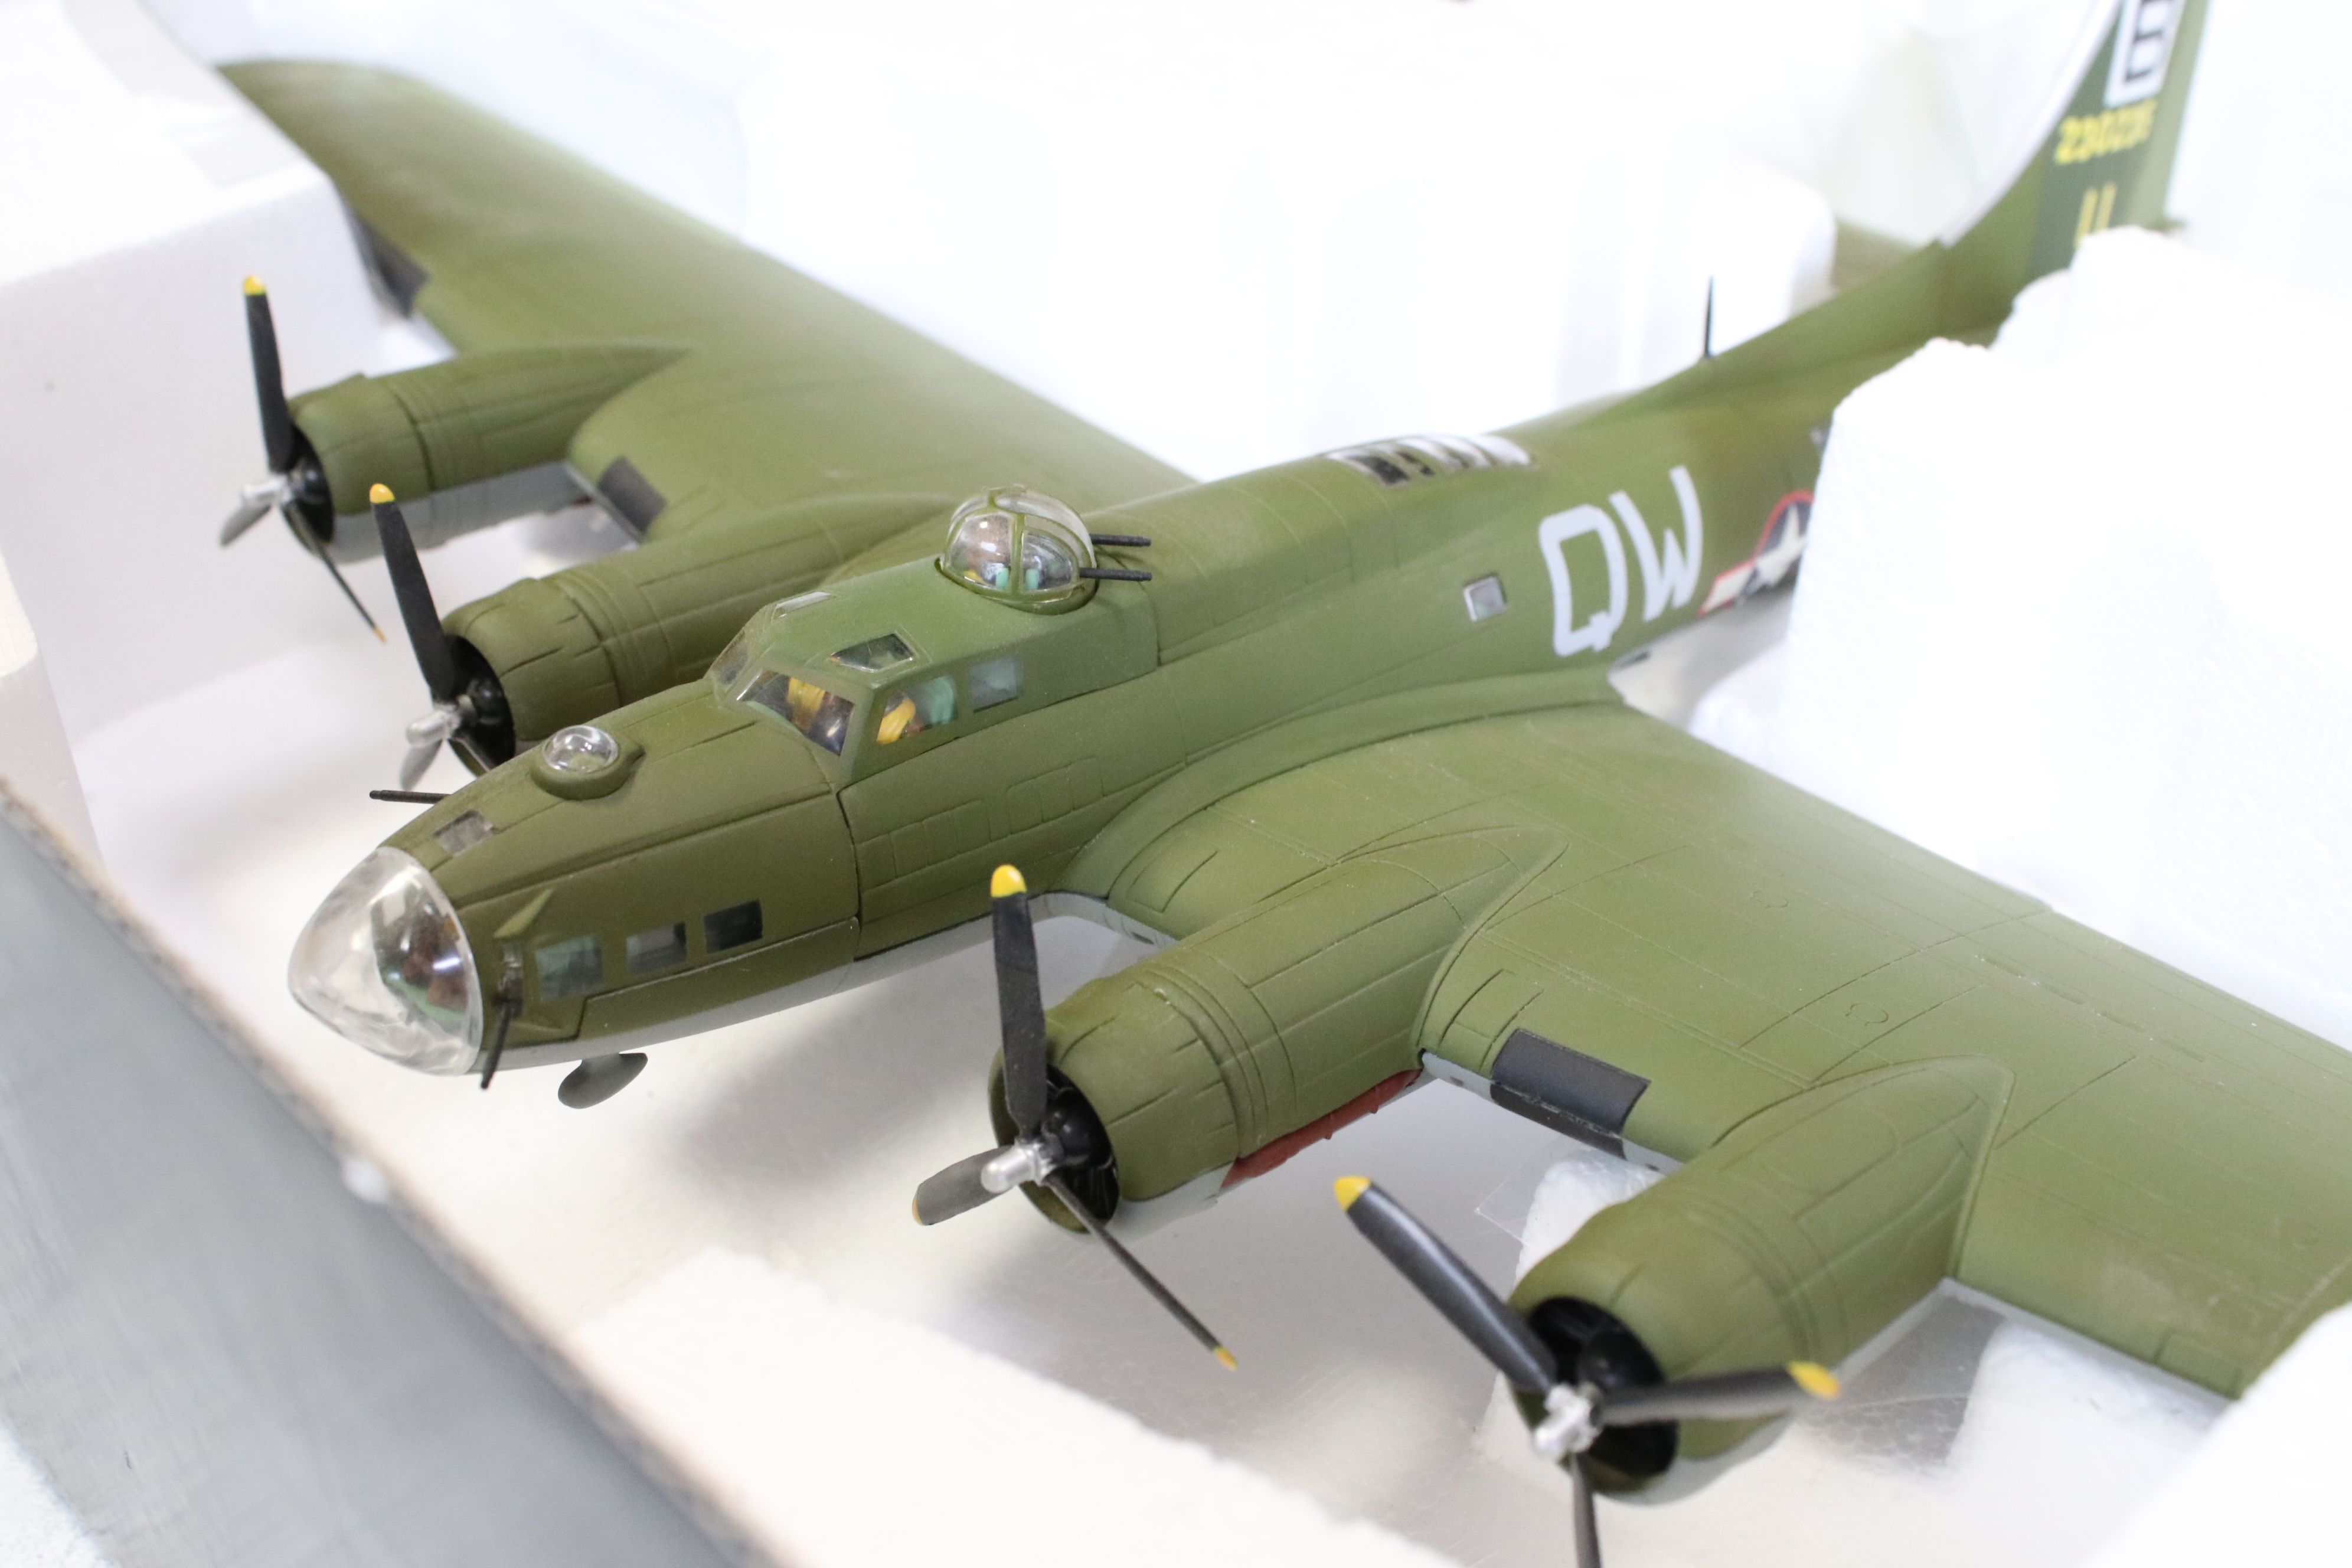 Two Boxed Corgi Aviation Archive 1/72 ltd edn military aircraft diecast models with certificates - Image 18 of 21